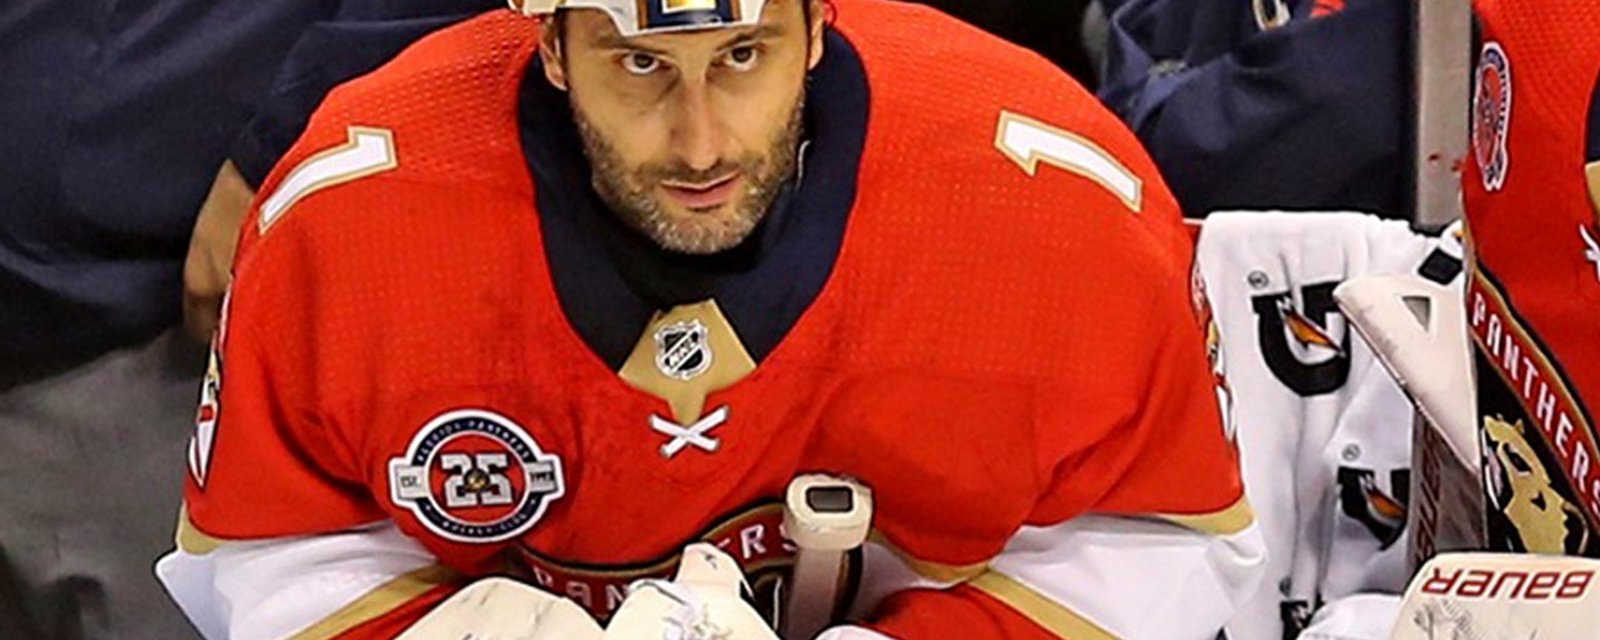 Roberto Luongo's career may be over. (Not April Fools)